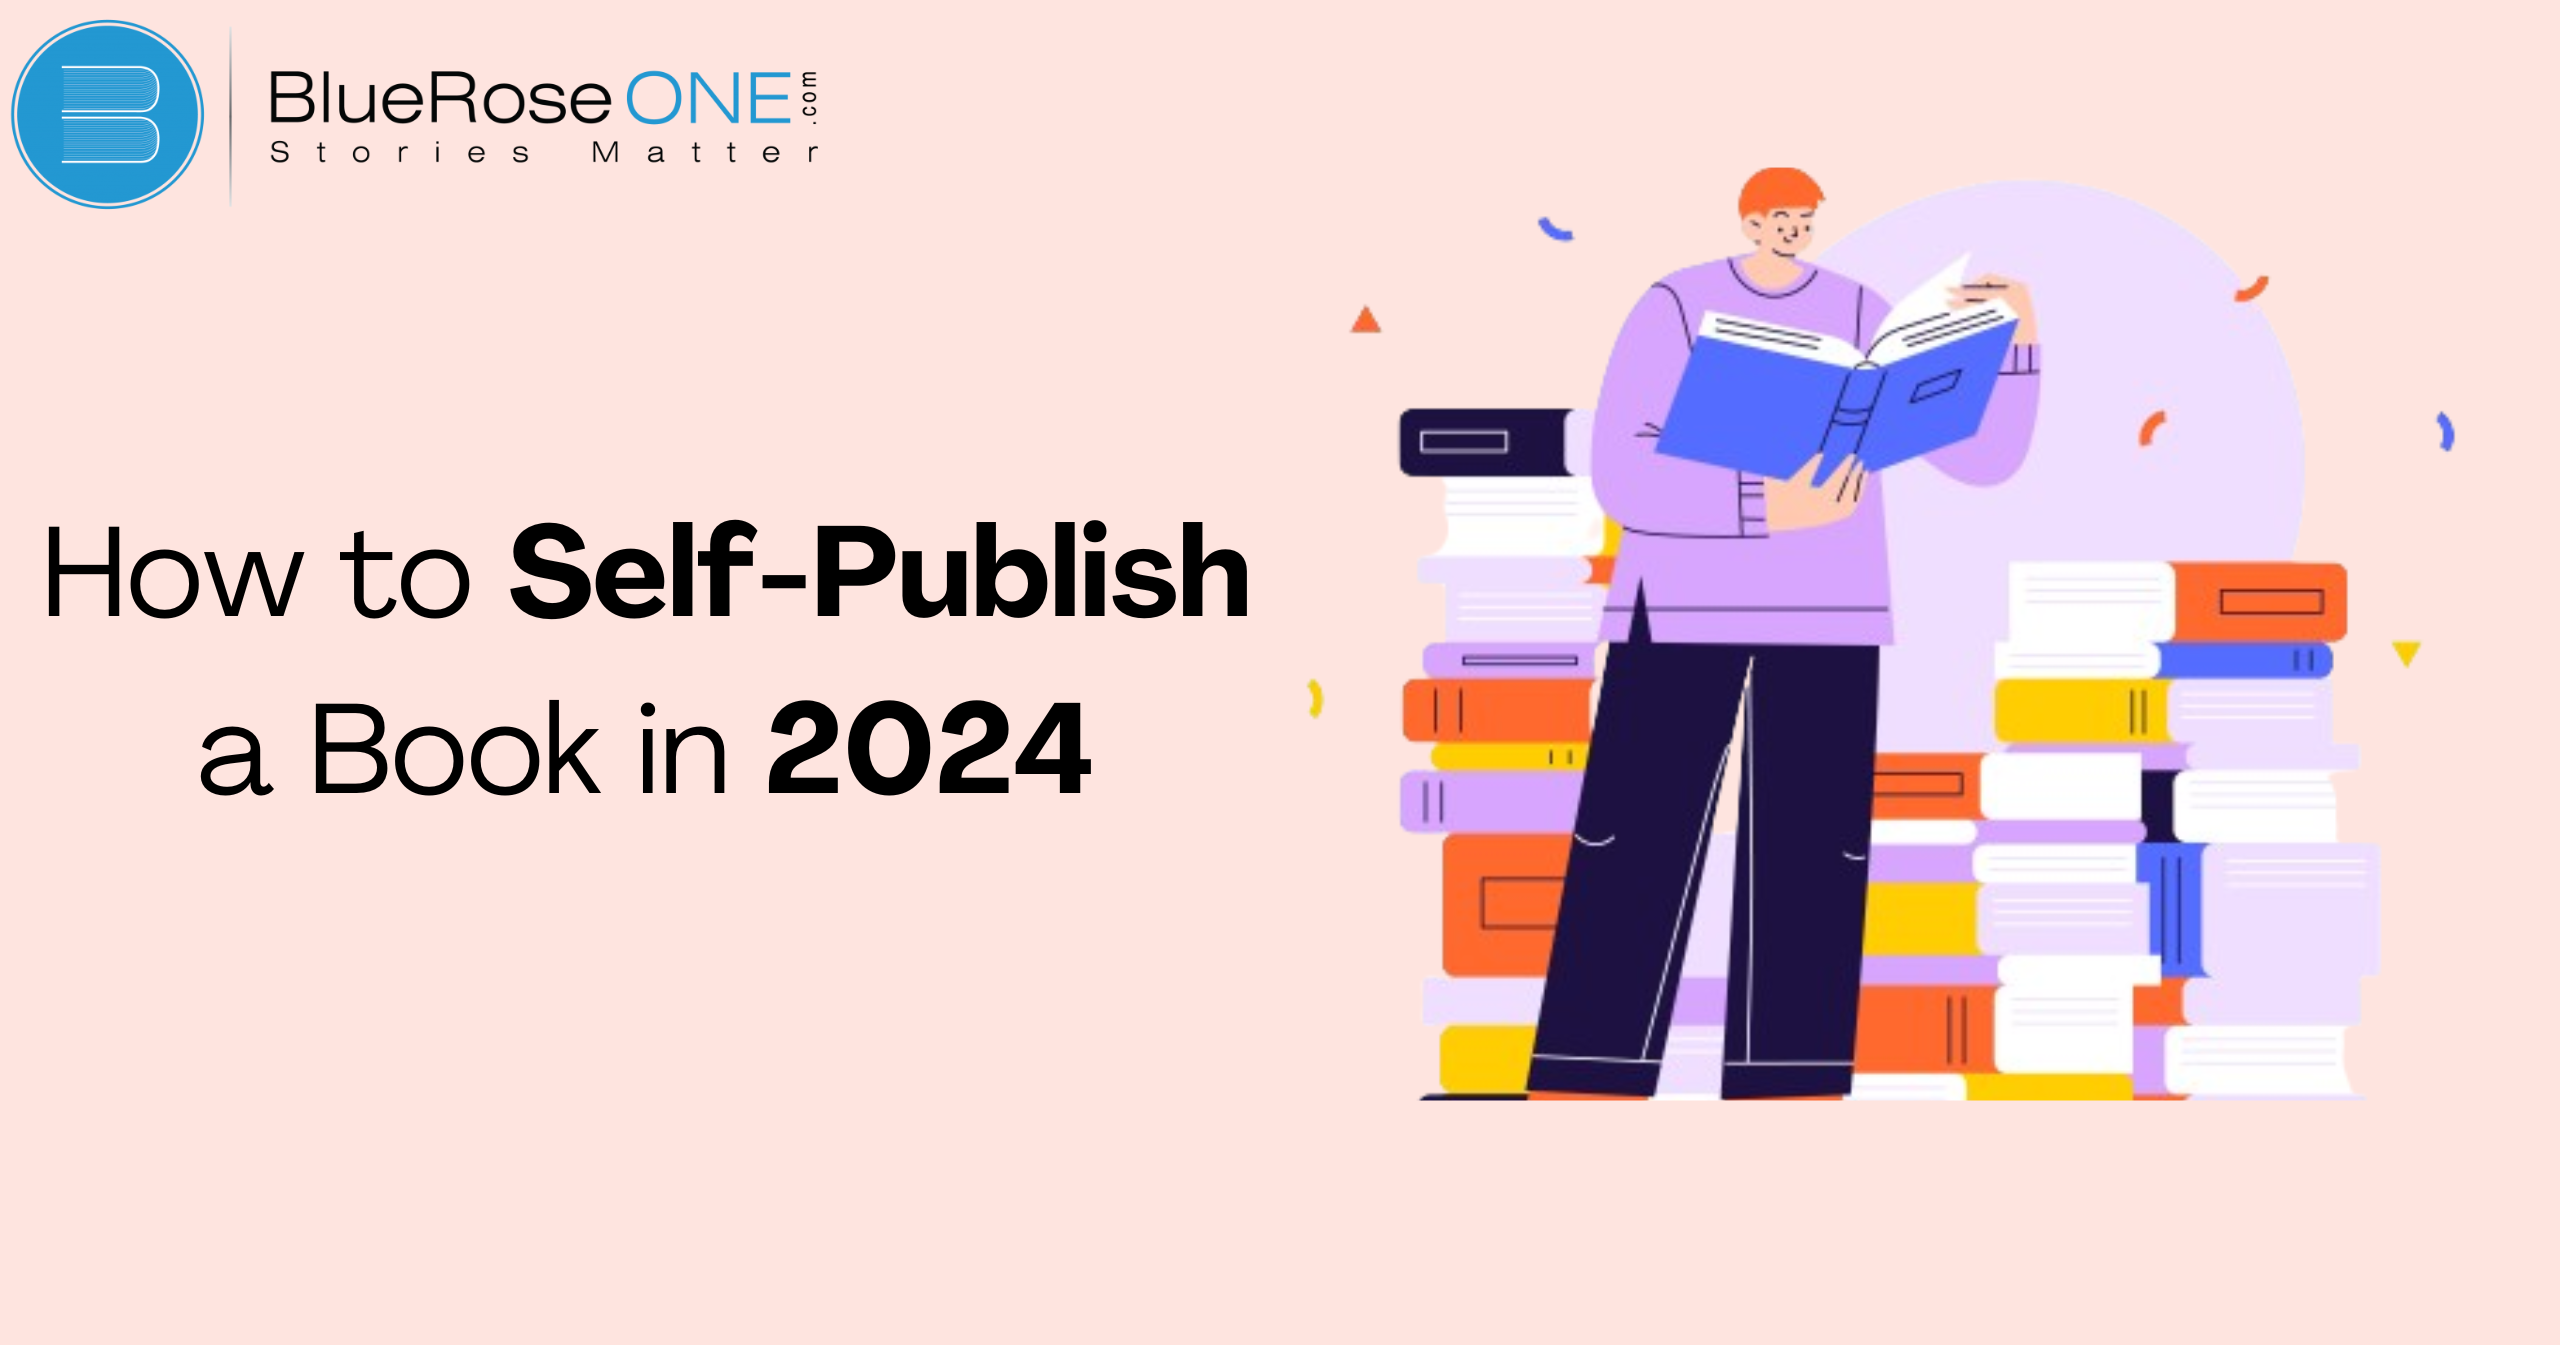 How to Self-Publish a book in 2024